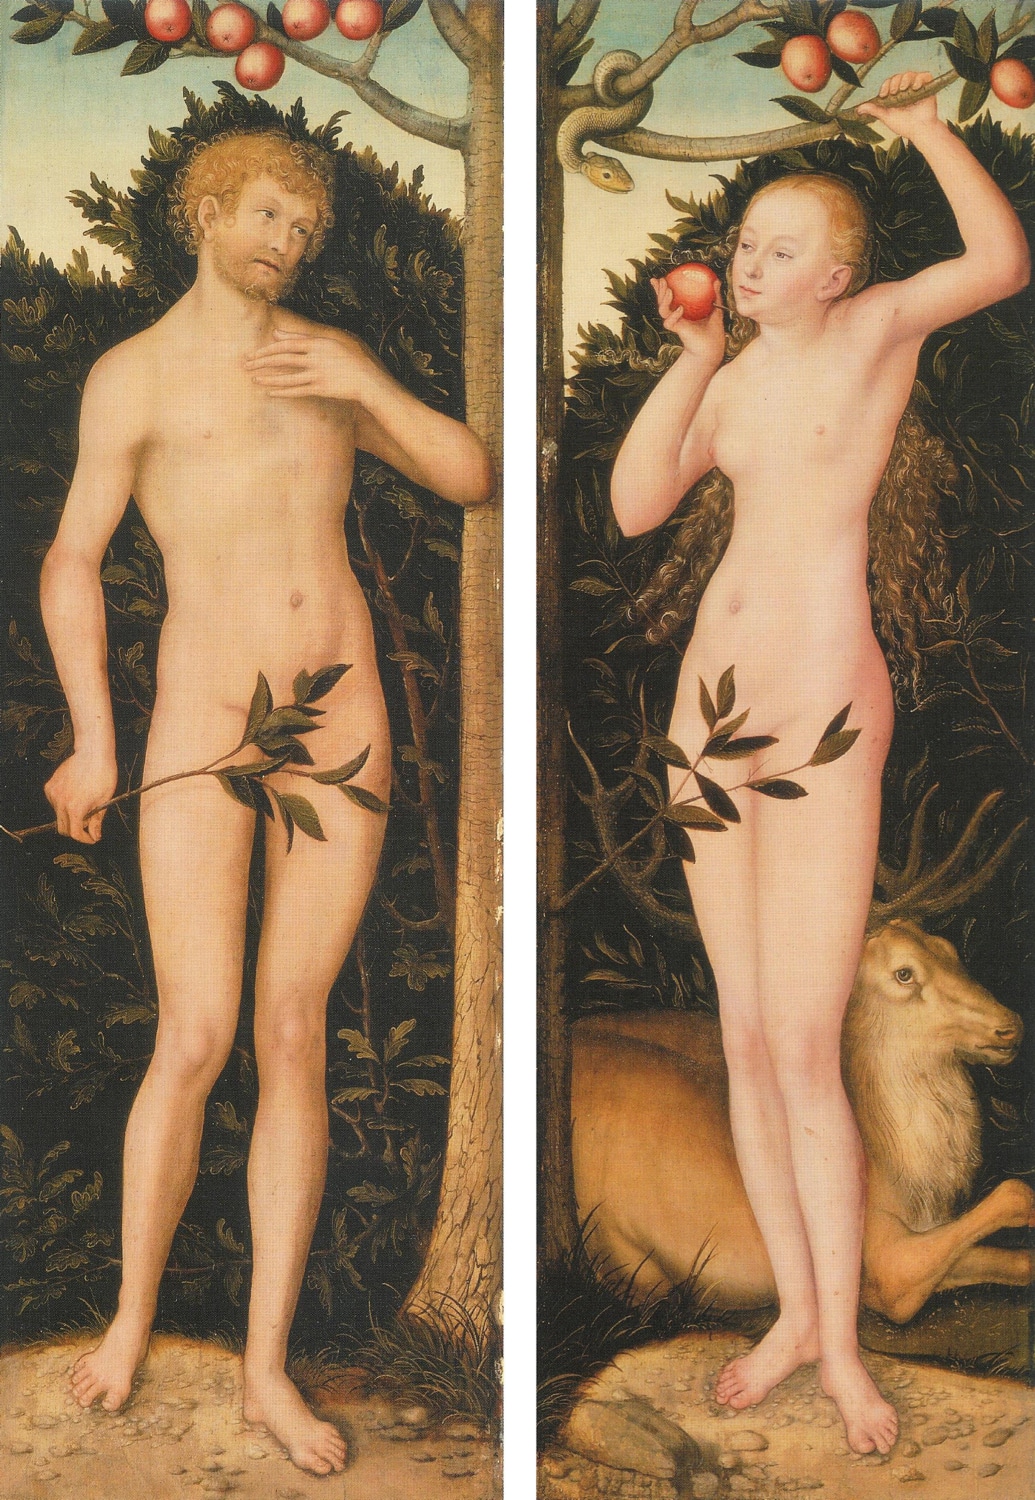 Lucas Cranach (1509-1533) painted this one of his many versions of Adam and Eve.